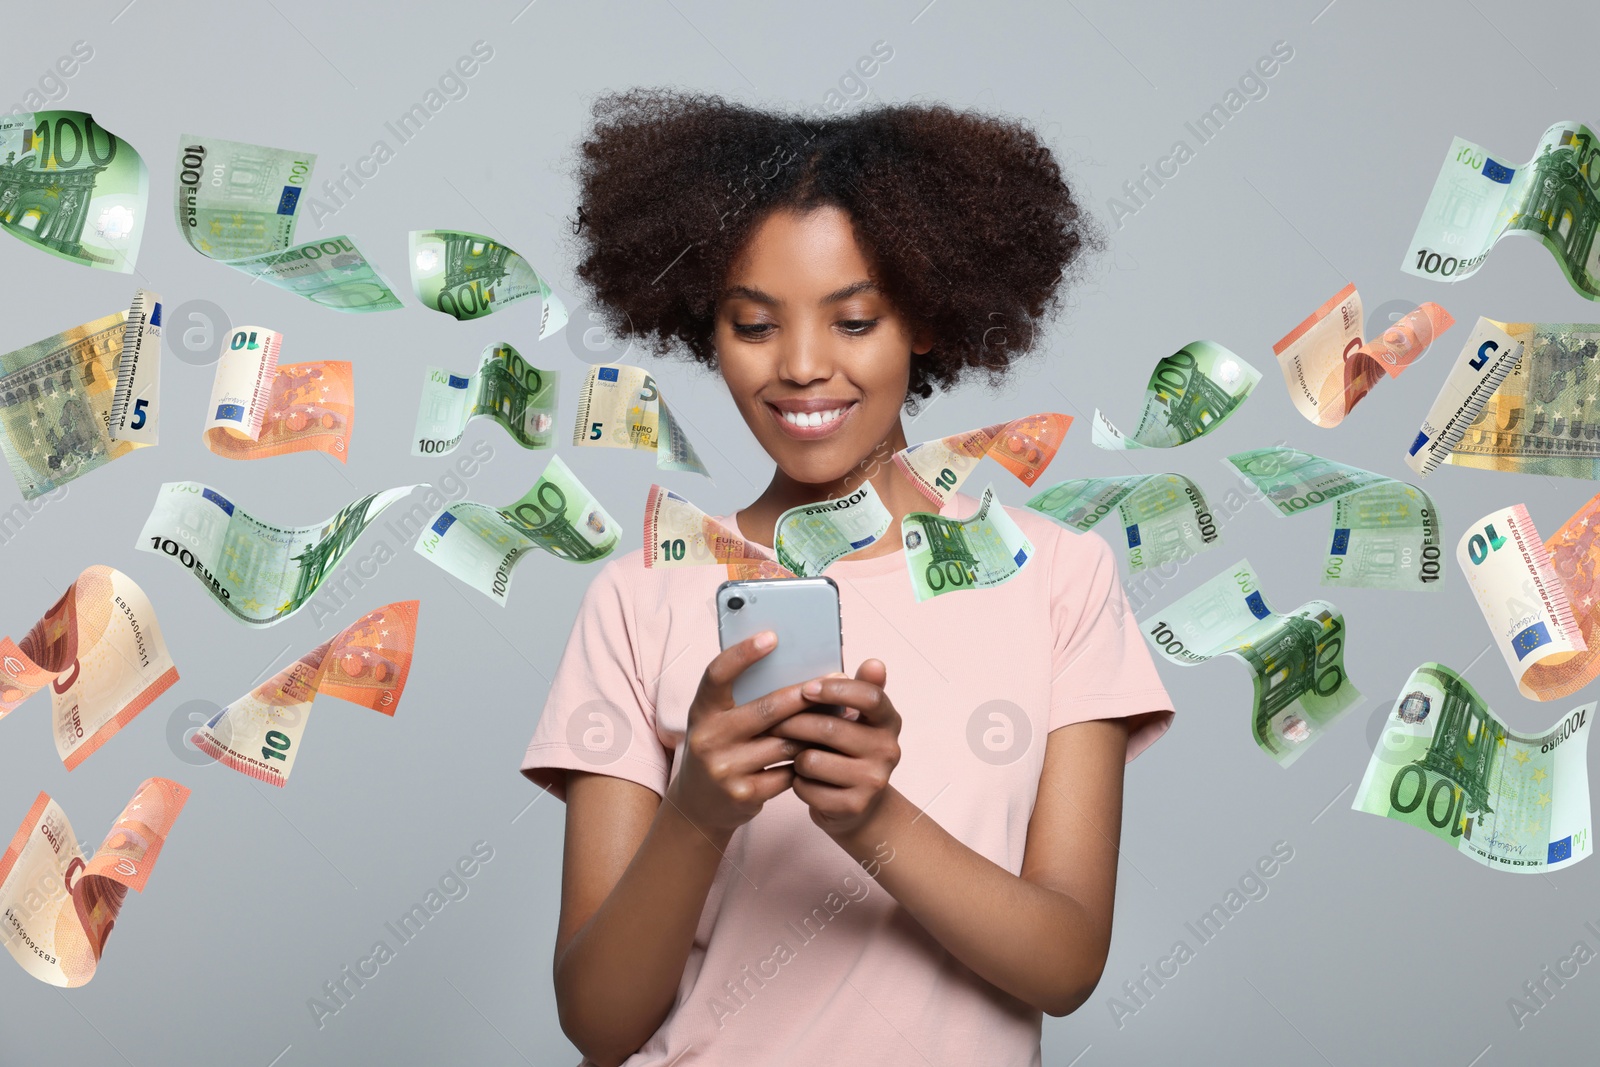 Image of Online payment. Woman buying something using mobile phone on light grey background. Euro banknotes flying out of gadget demonstrating process of money transaction